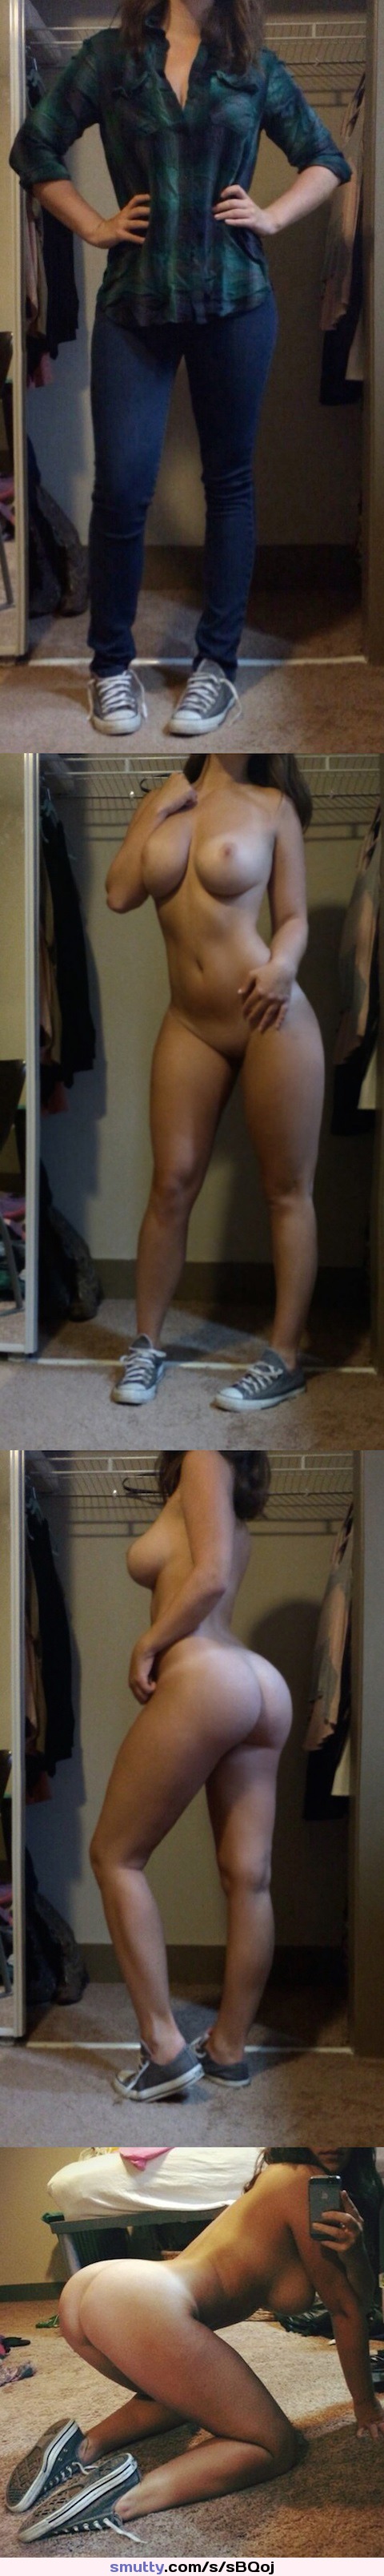 daughter in law came in the care of not her father in law porn Beforafter, Beforeandafter, Bigboobs, Bigboobs, Bigtits, Clothedunclothed, Dressedundressed, Dressedundressed, Idfuckher, Idfuckhertits, Katelyn, Mirror, Mirrorshot, Onoff, Selfie, Selfie, Selfie, Selfshot